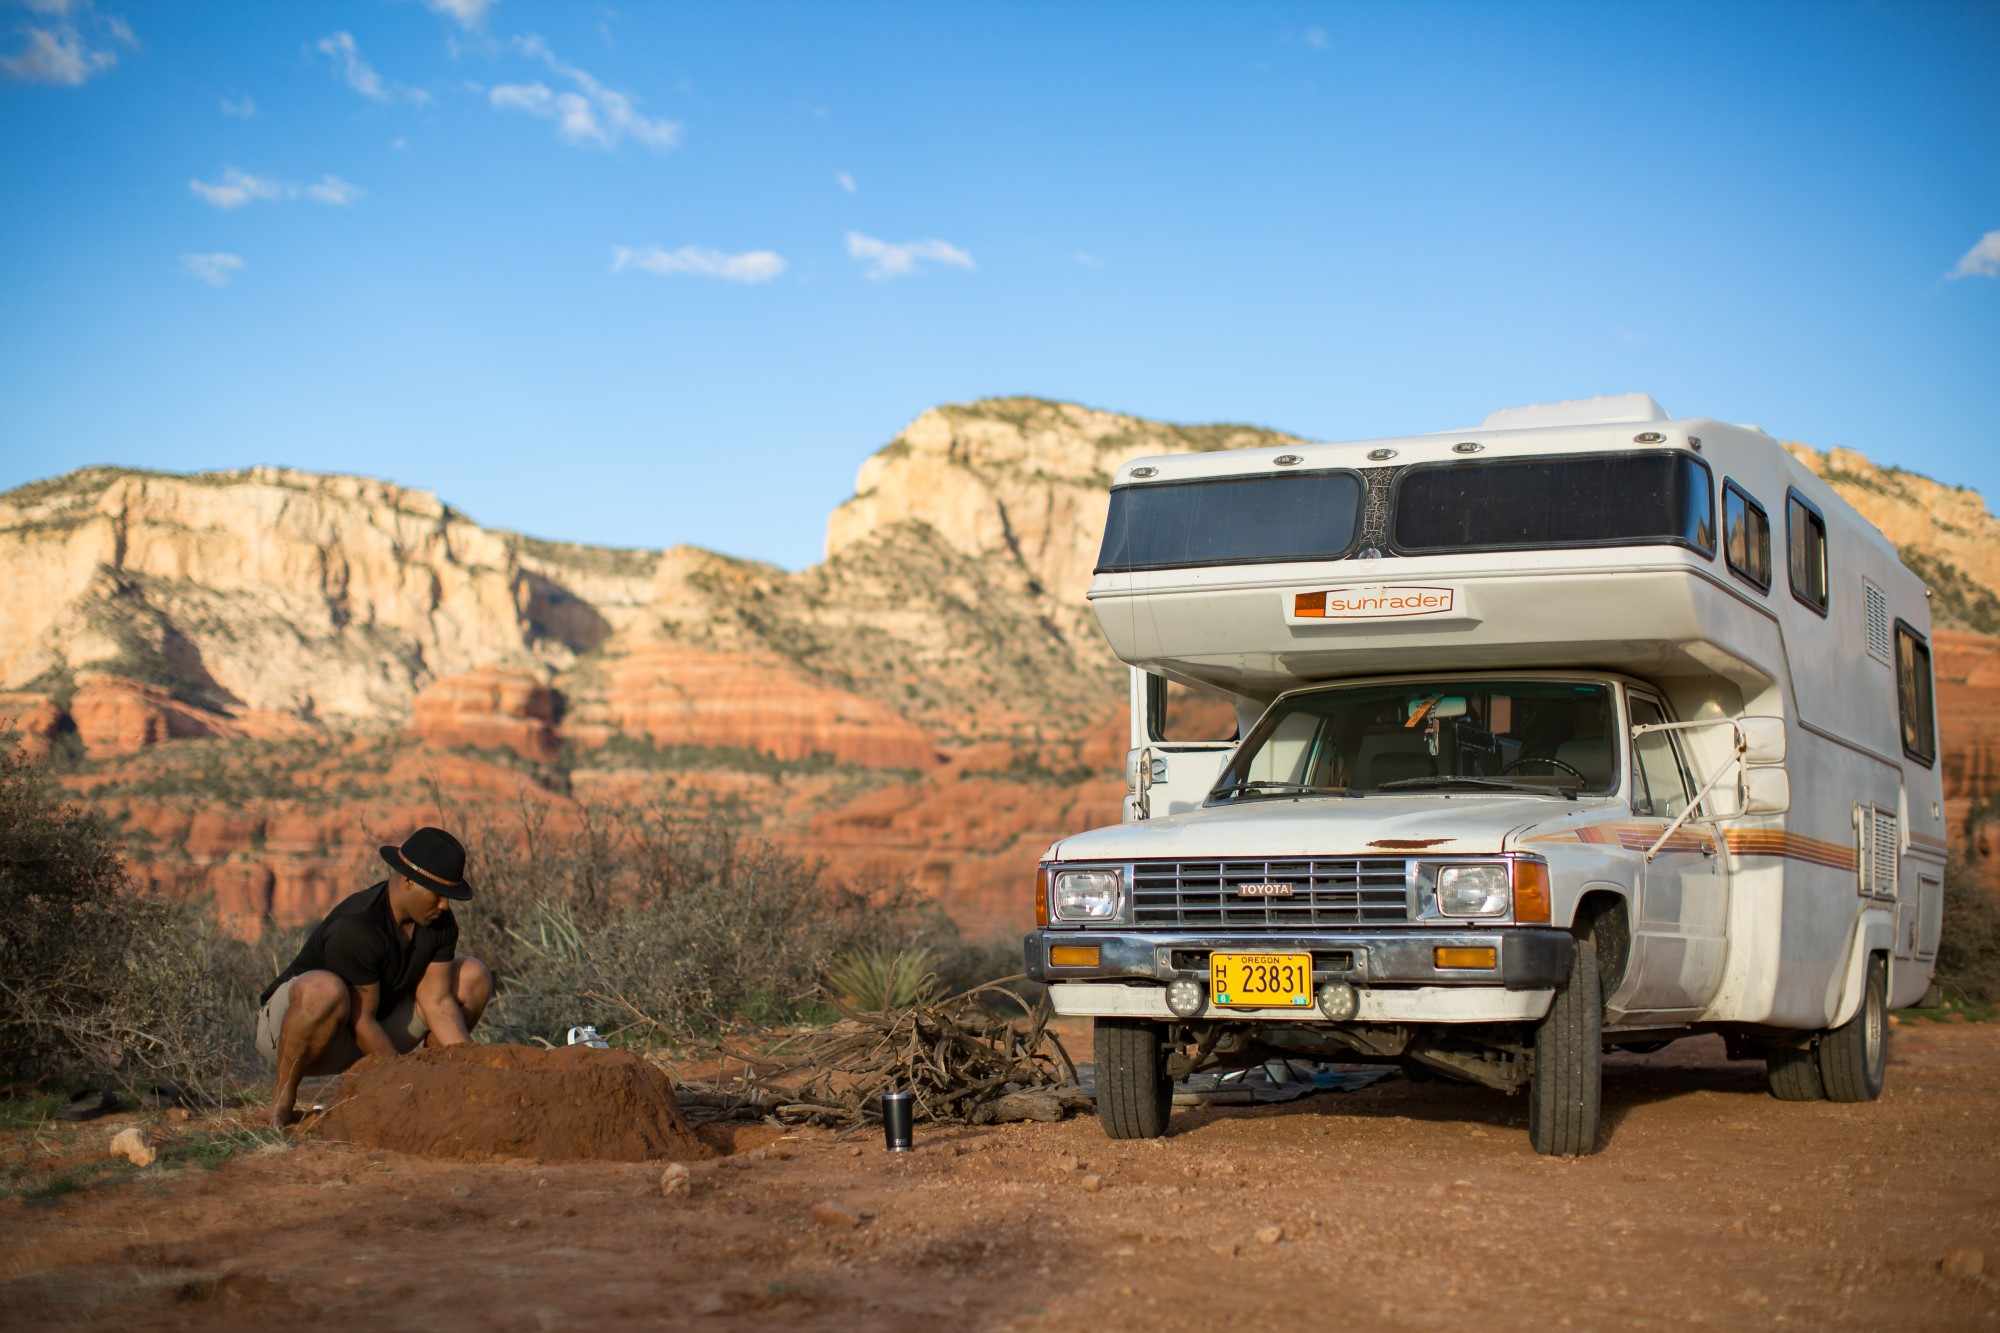 Making Money on the Road: How Network Marketing, Photography, and Freelance Writing Make Full-Time Vanlife Possible